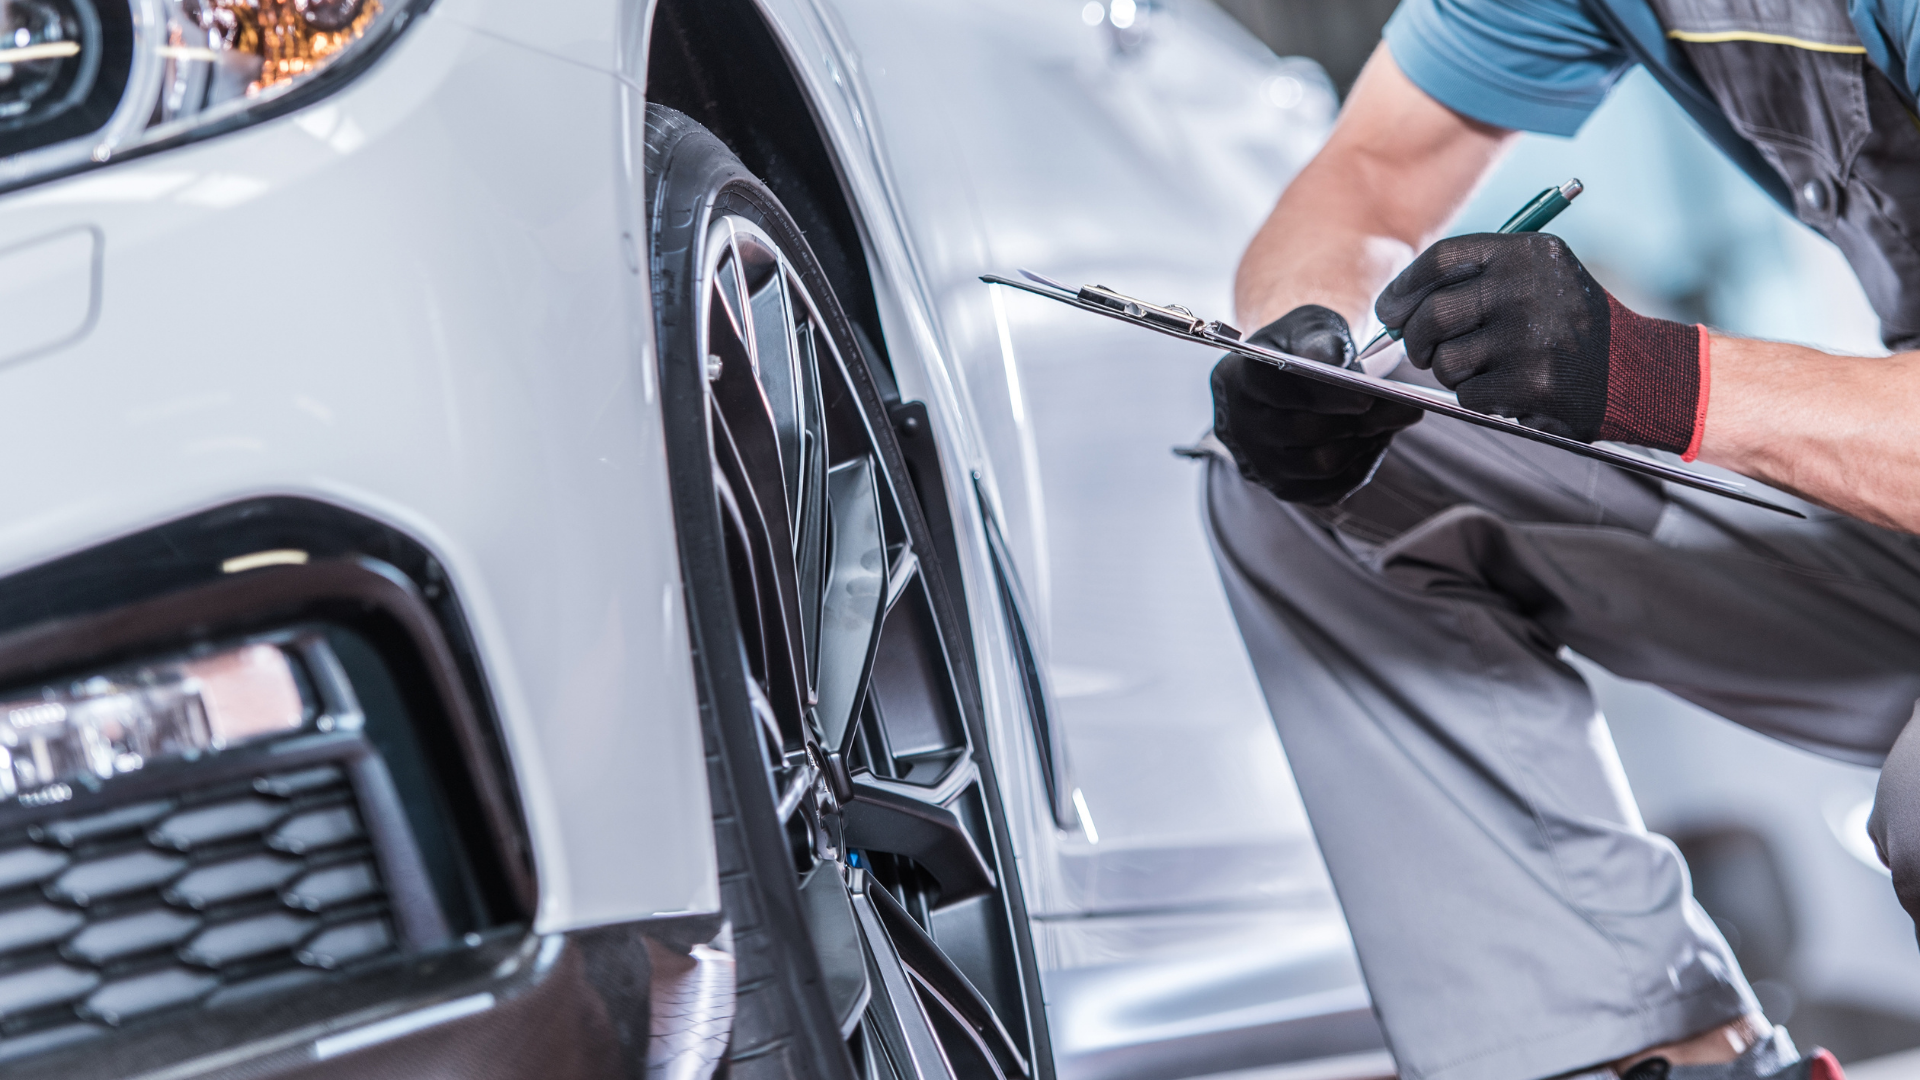 Breakdowns may be avoided with routine maintenance and inspections of your car